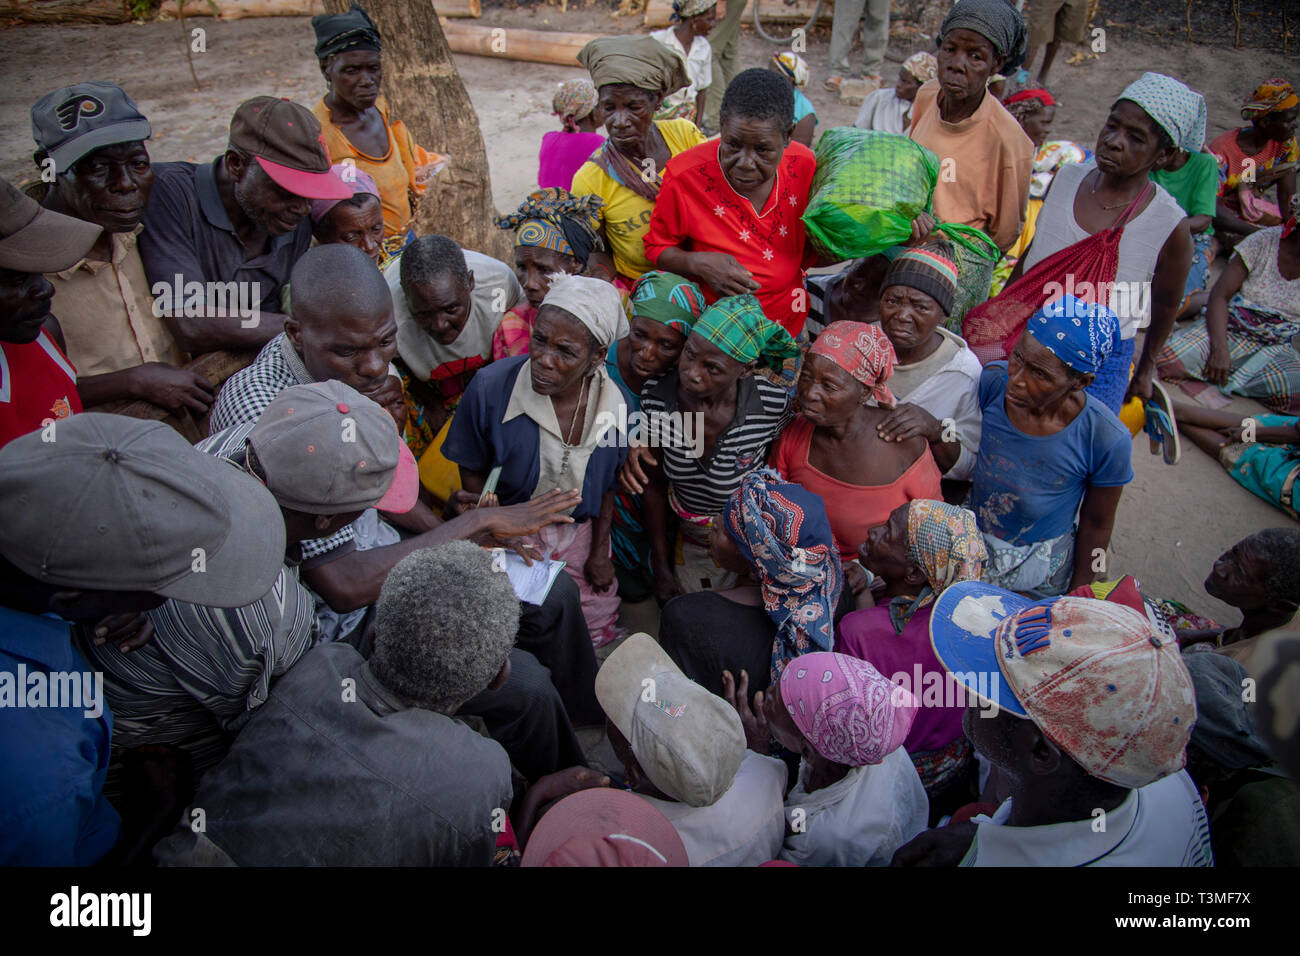 Village elders wait for food aid to be distributed in the aftermath of the massive Cyclone Idai April 6, 2019 in Nhagau, Mozambique. The World Food Programme, with help from the U.S. Air Force is transporting emergency relief supplies to assist the devastated region. Stock Photo